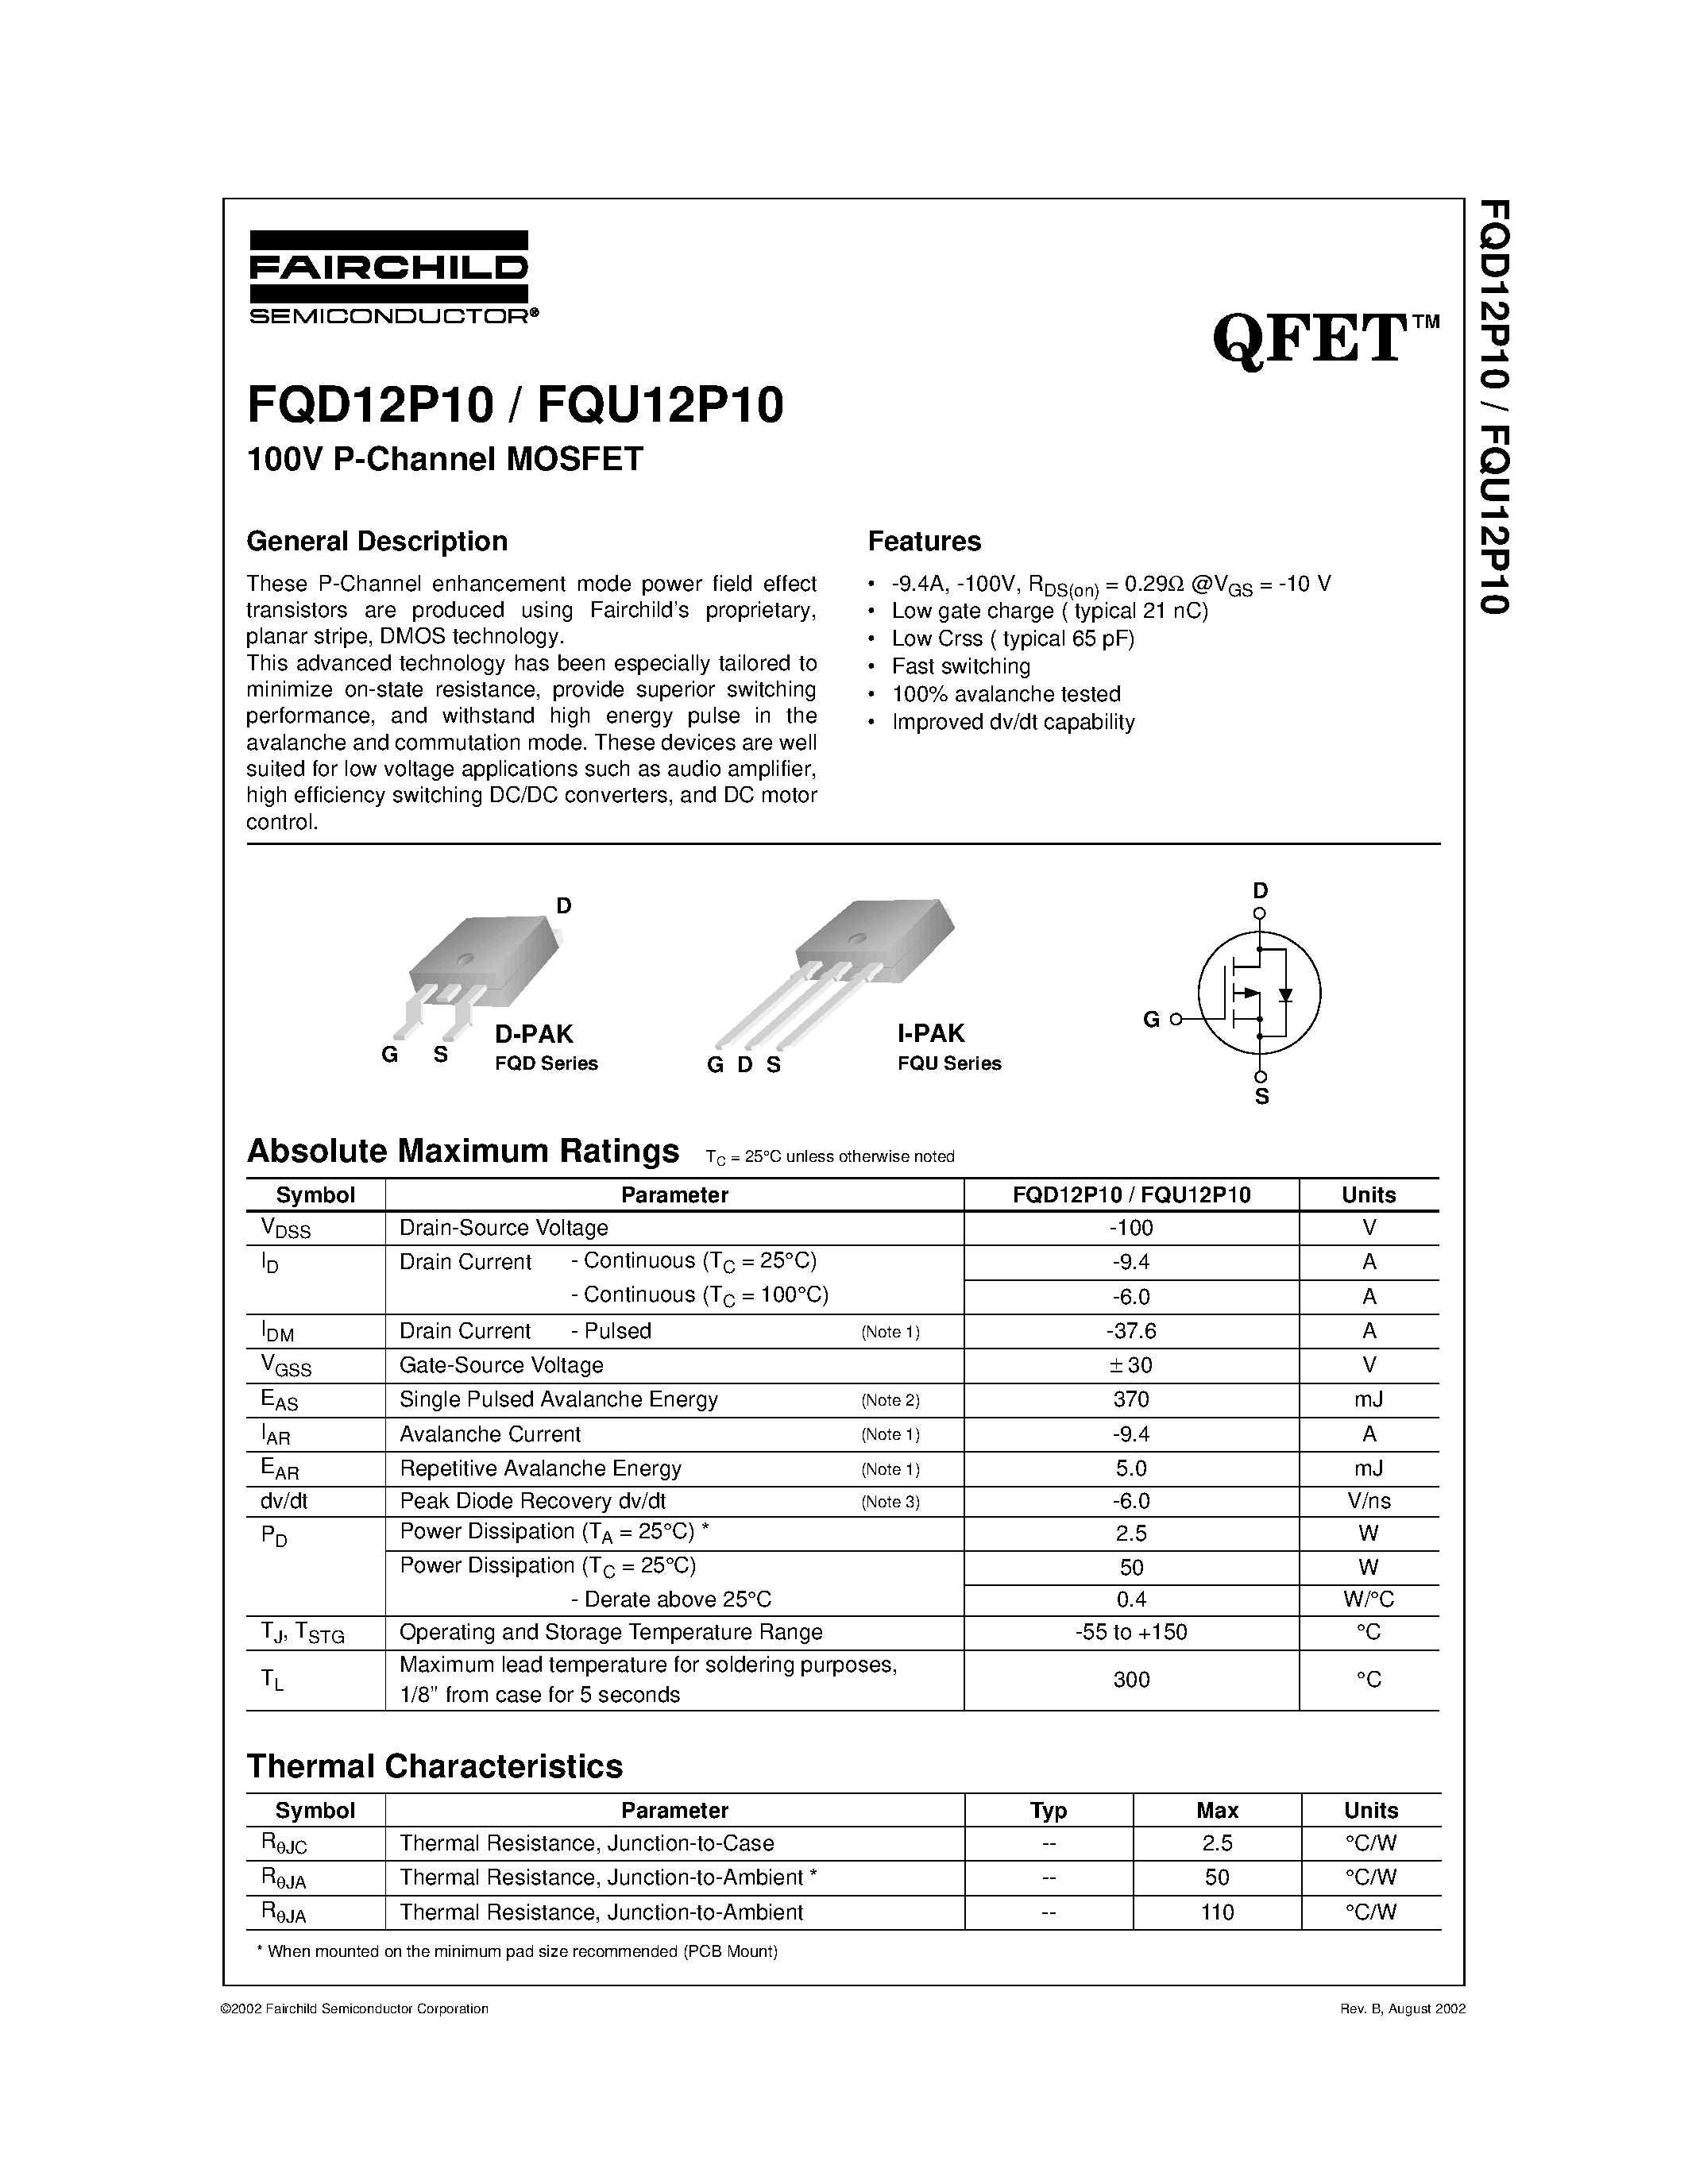 Datasheet FQD12P10 - 100V P-Channel MOSFET page 1